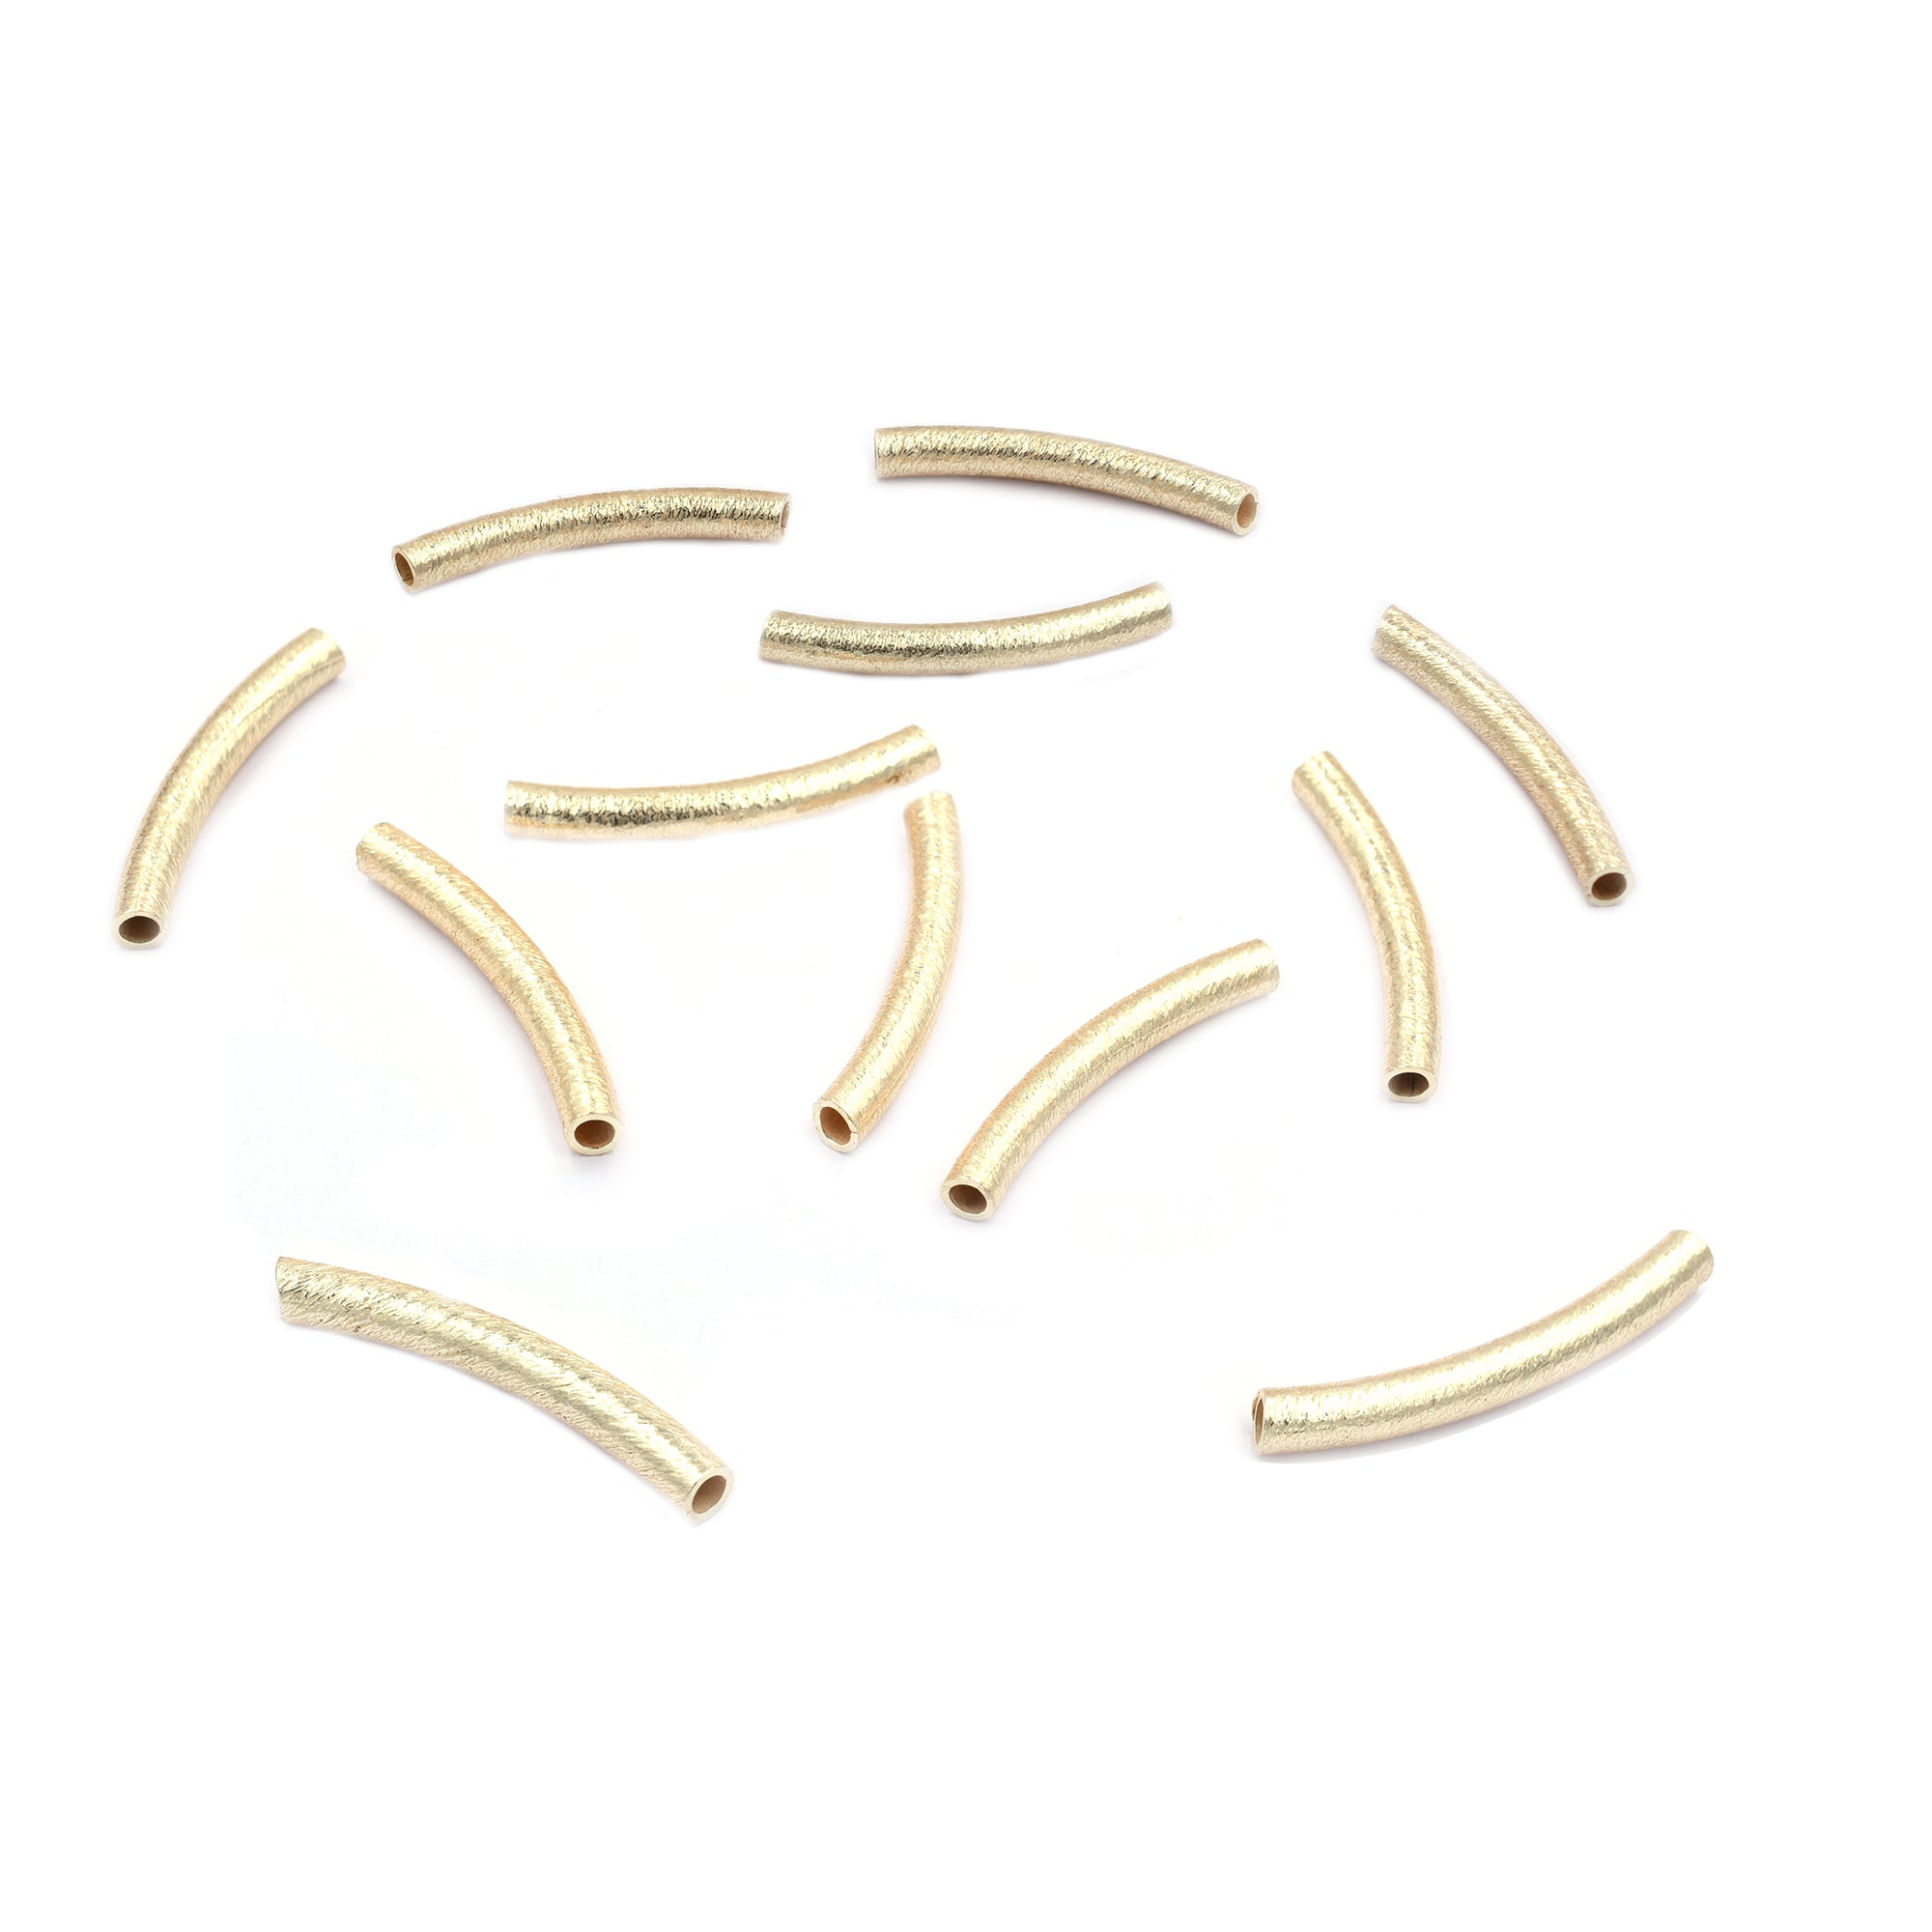 30 Pcs 30X4mm Curved Tube Brushed Matte Finish Beads Gold Plated Copper